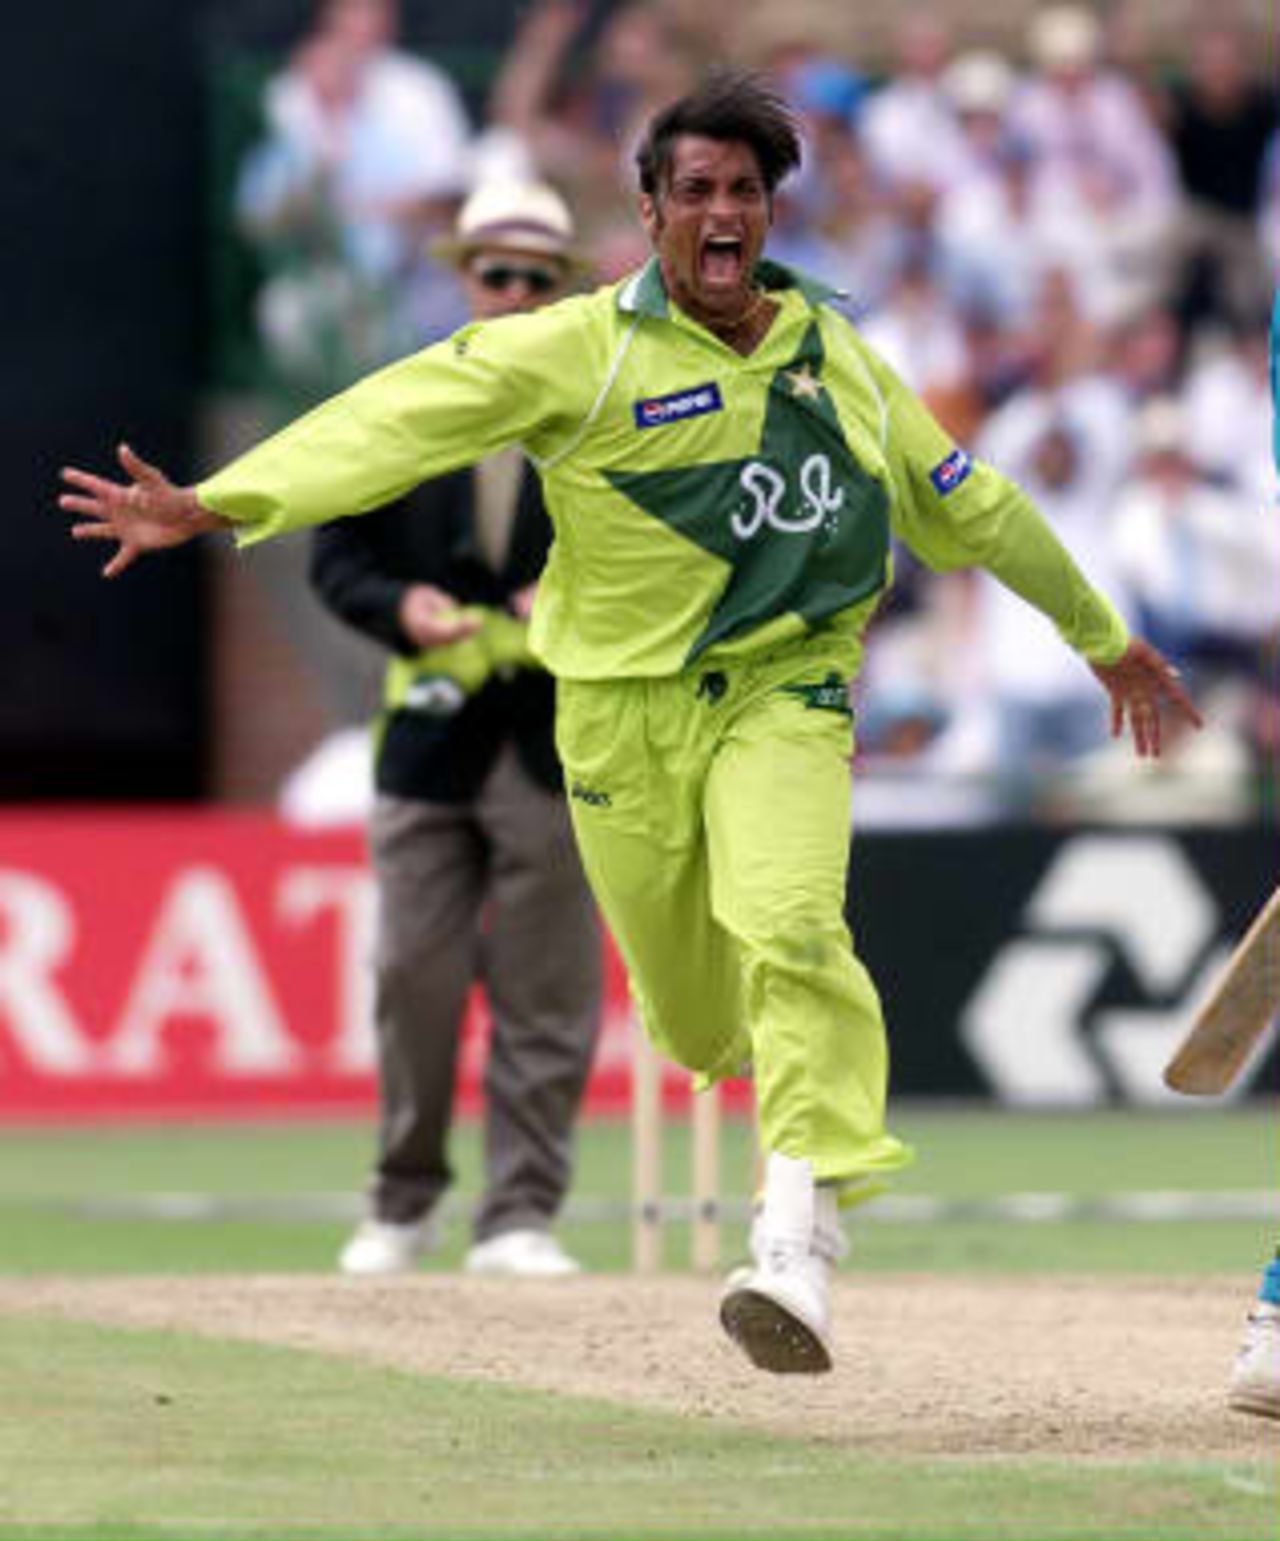 Pakistan's fast bowler Shoaib Akhtar screams with delight after clean bowling New Zealand captain Stephen Fleming 16 June 1999,  during their semi-final match in the Cricket World Cup at Old Trafford, Manchester.  The final will be at Lords 20 June 1999